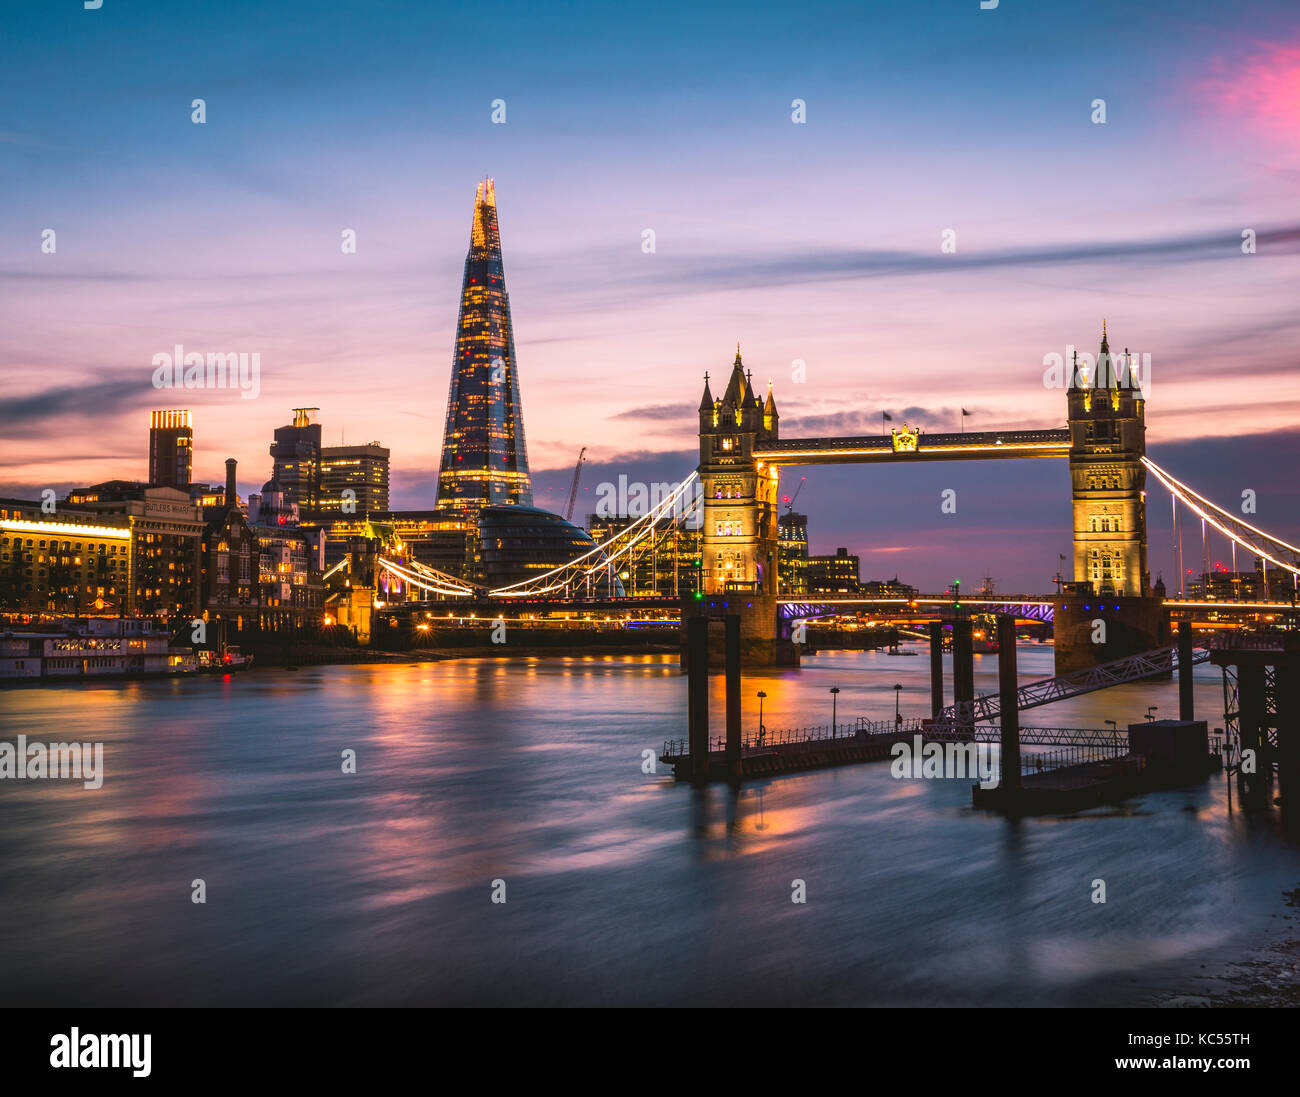 Themse, Tower Bridge, The Shard, Sunset, illuminé, vue sur l'eau, Southwark, St Katharine's & Wapping, Londres, Angleterre Banque D'Images